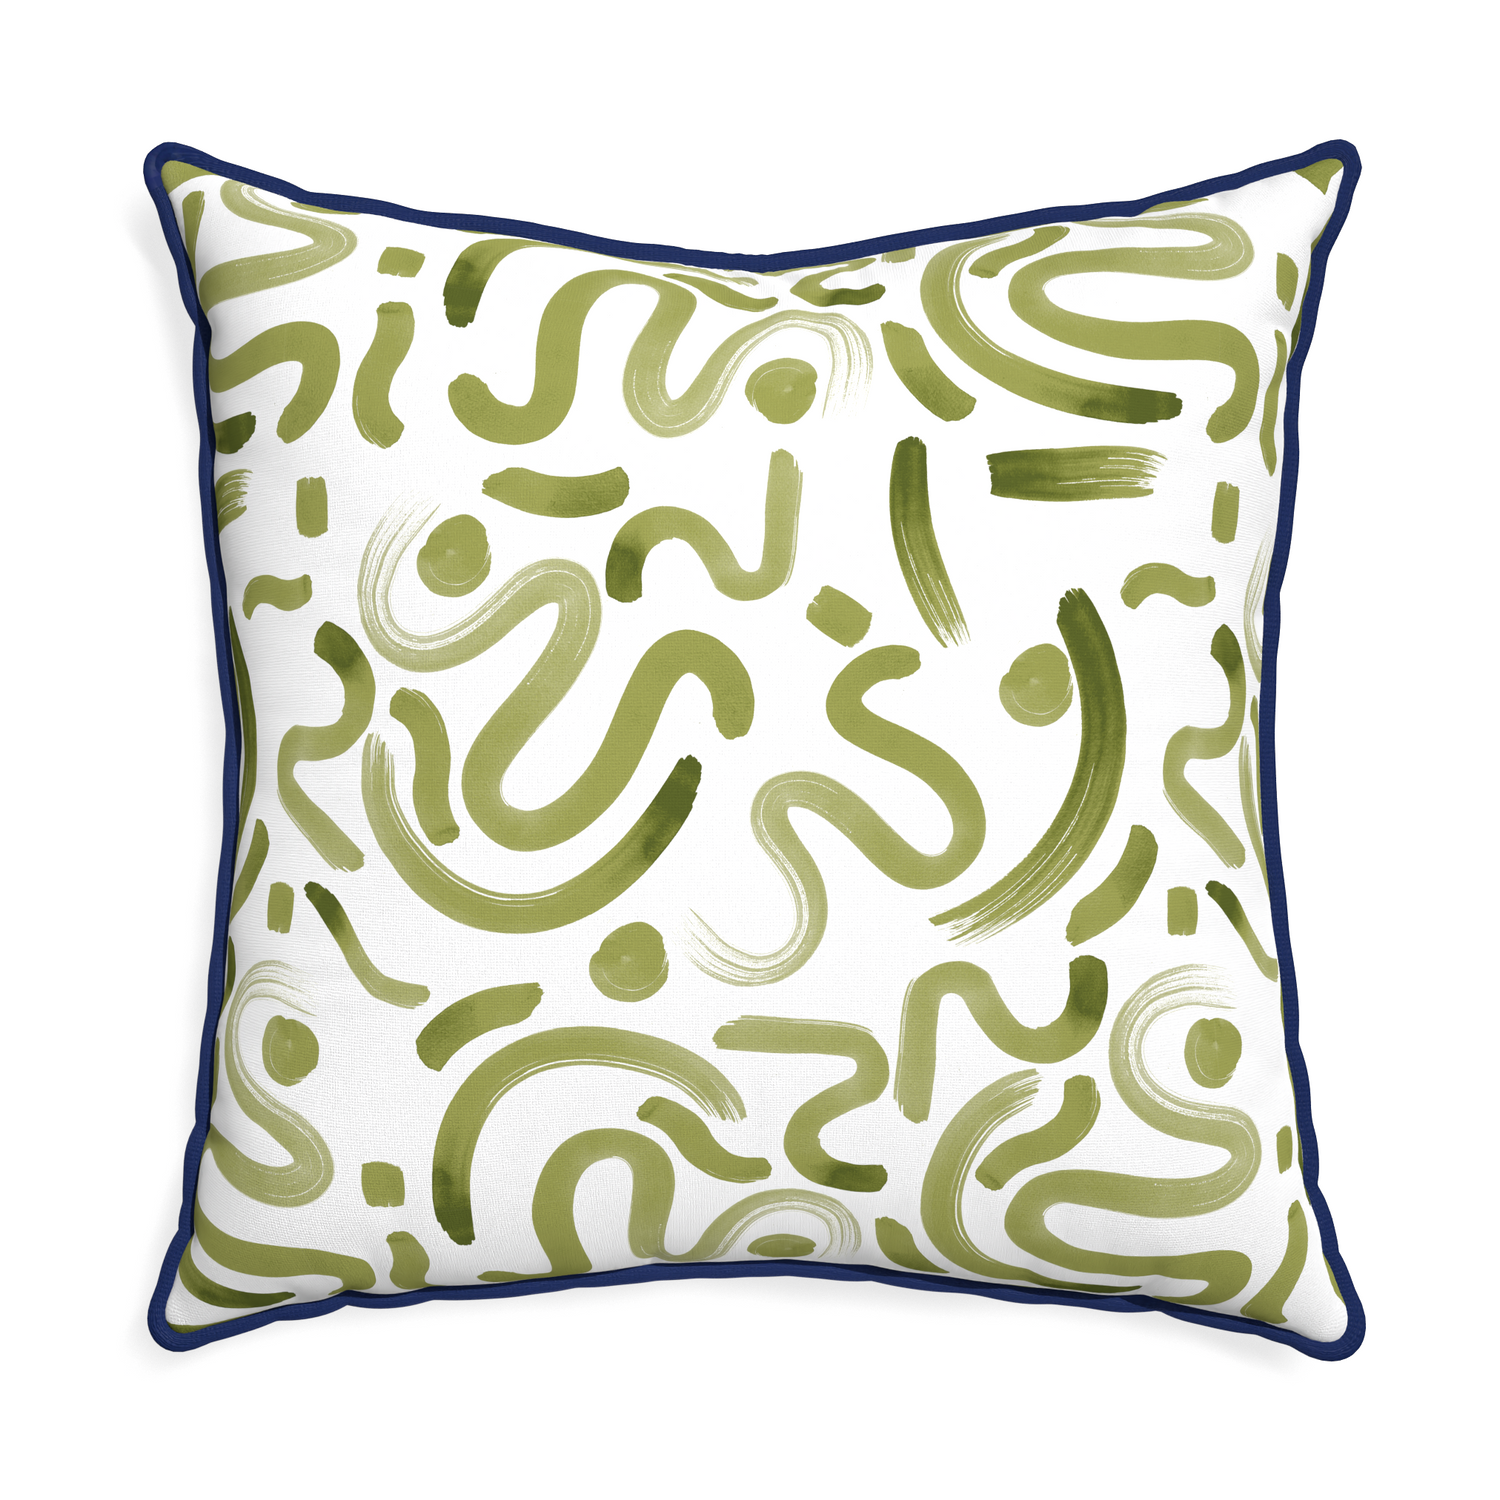 Euro-sham hockney moss custom moss greenpillow with midnight piping on white background